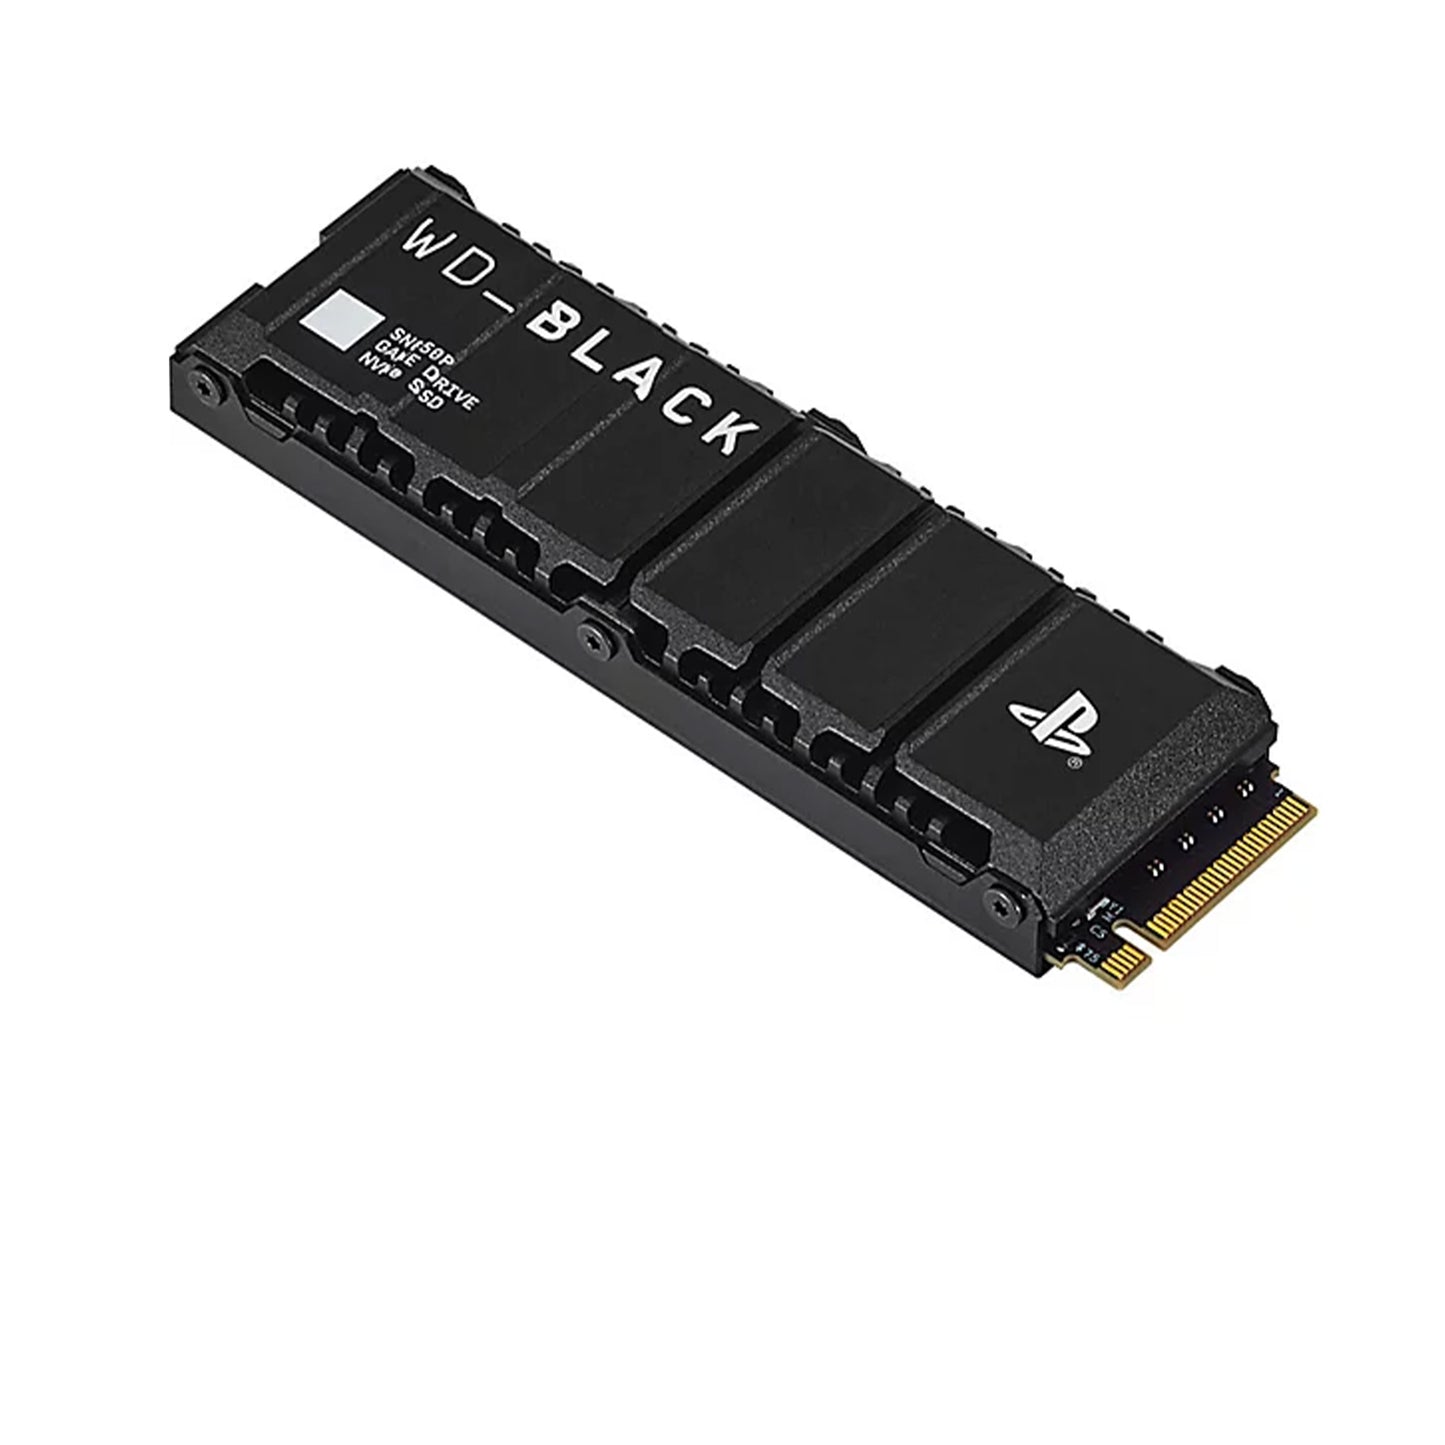 4TB WD BLACK™ SN850P NVMe™ SSD for PS5™ consoles